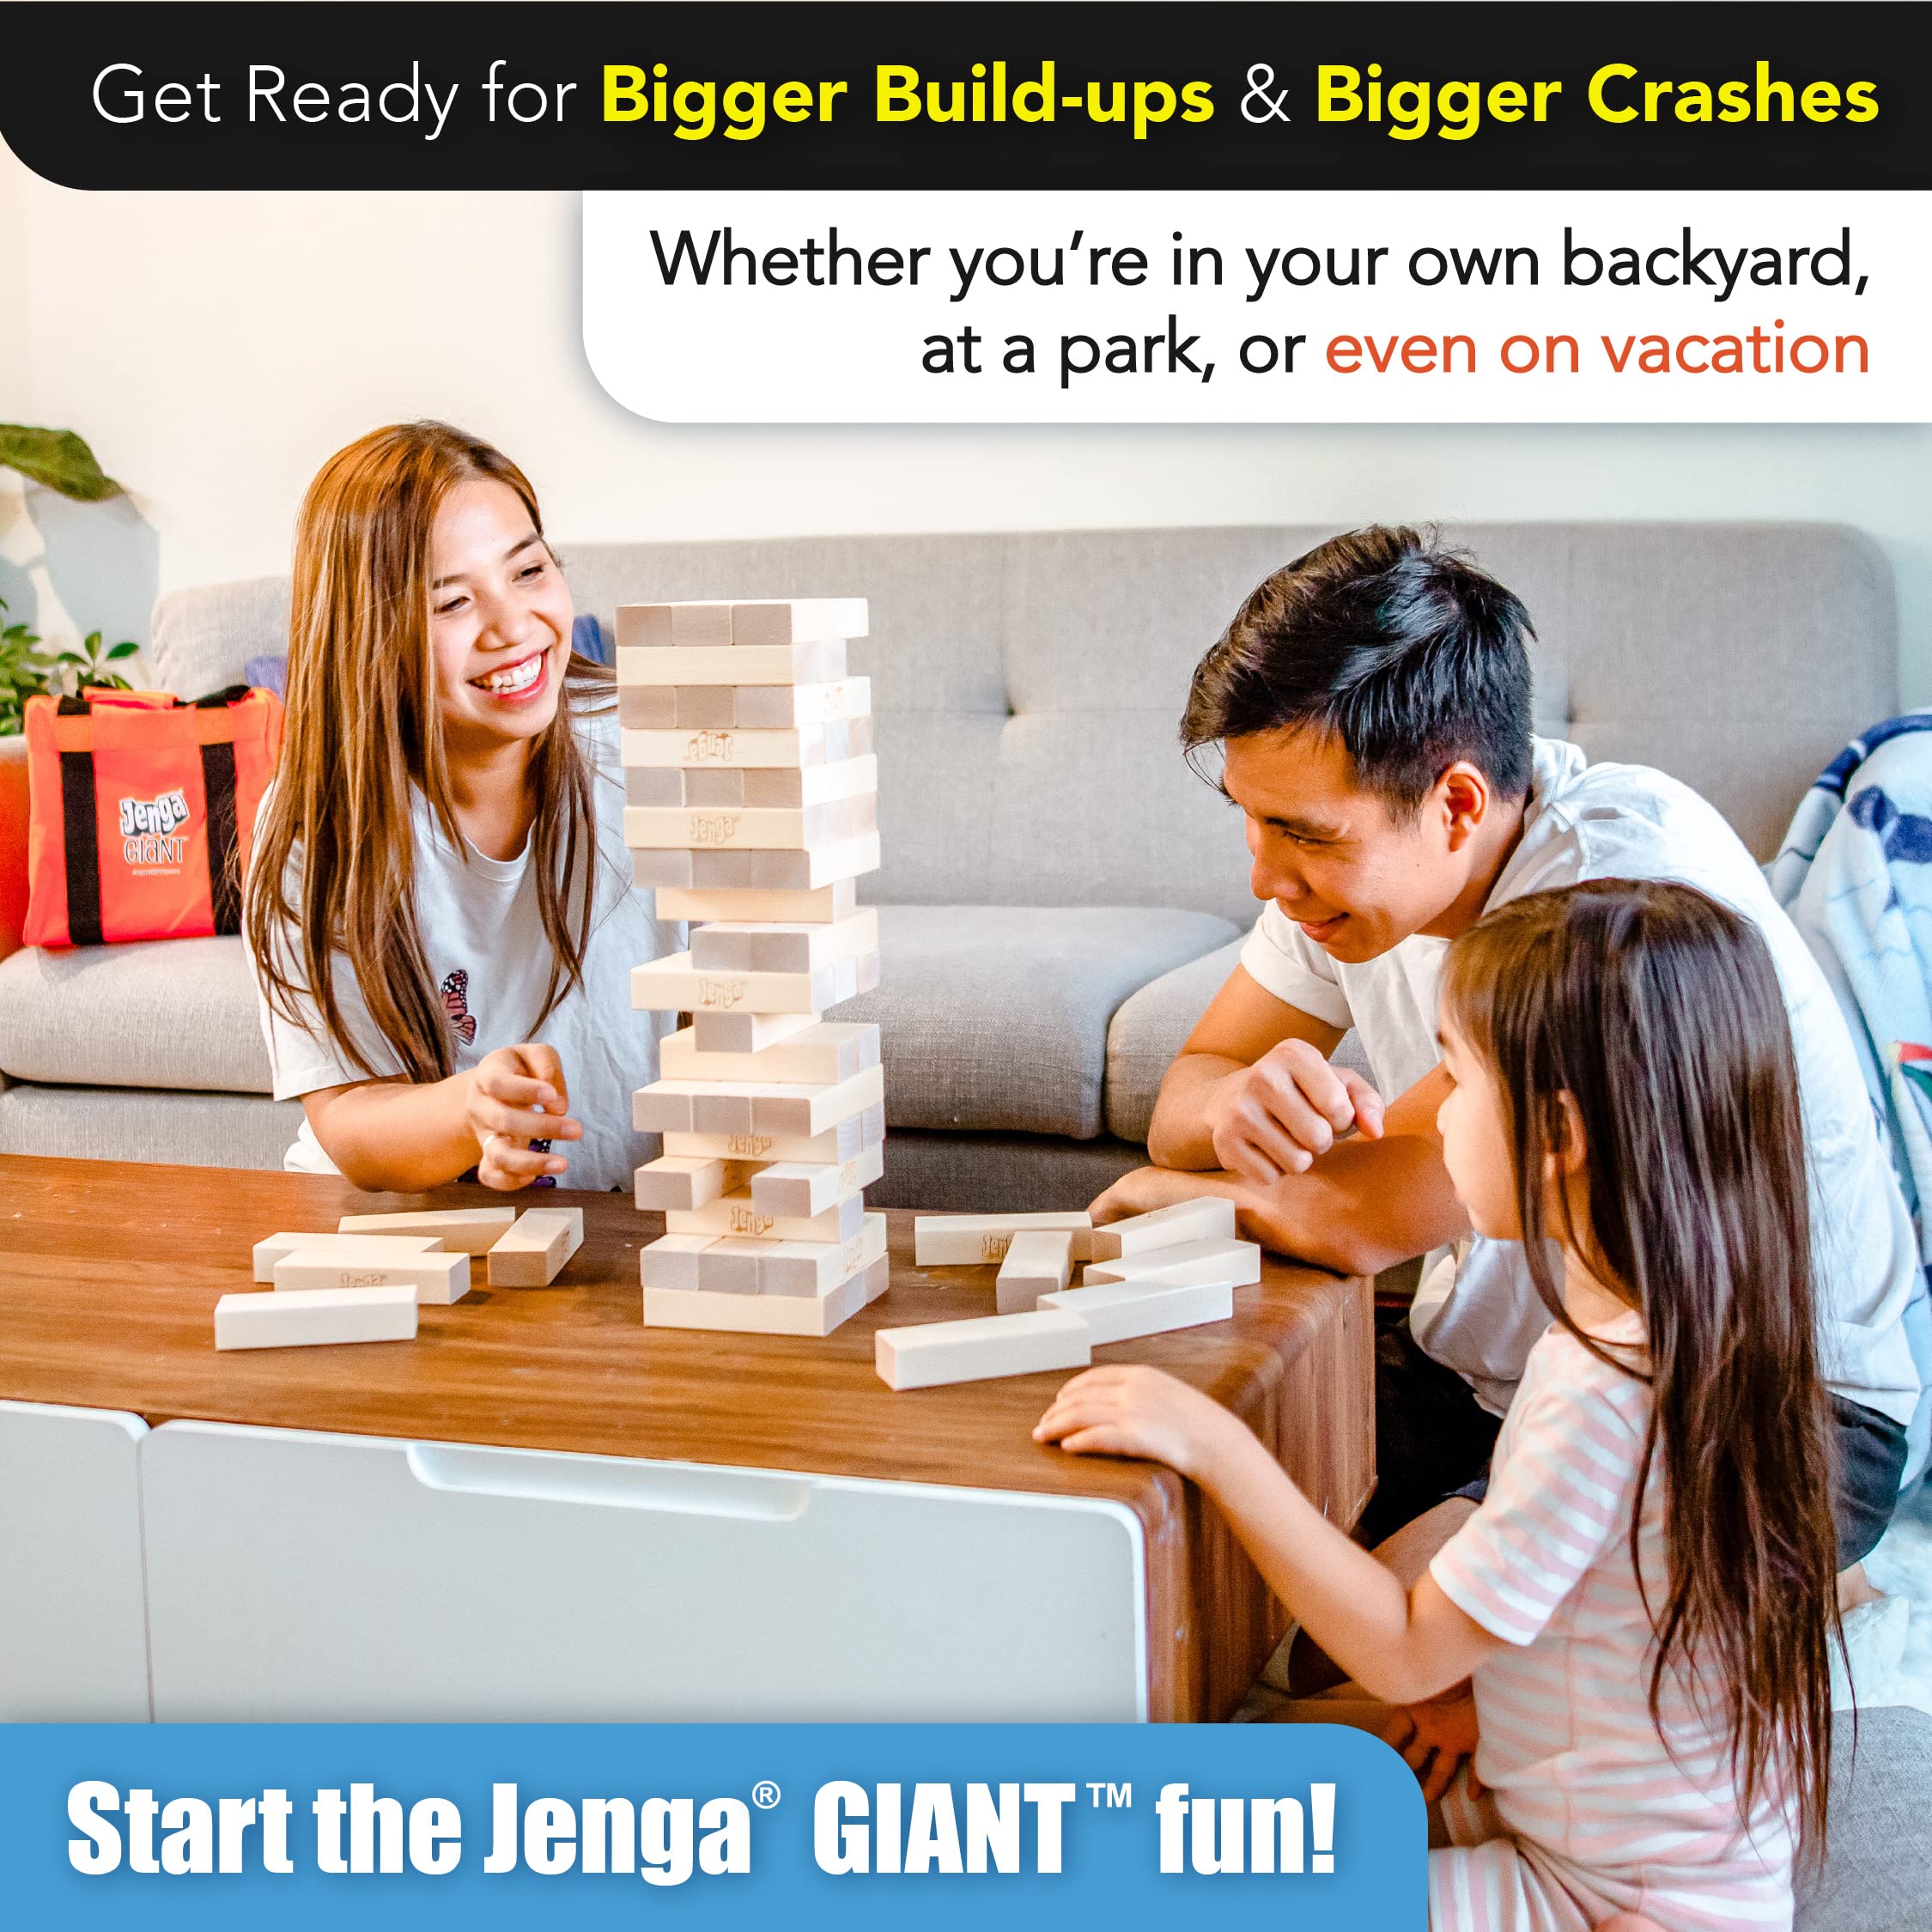 Jenga Official Giant JS4 - Oversized Stacks to Over 3 Feet in Play, Includes Heavy-Duty Carry Bag, Premium Splinter Resistant Hardwood Blocks, Precision-Crafted Trusted Brand Game